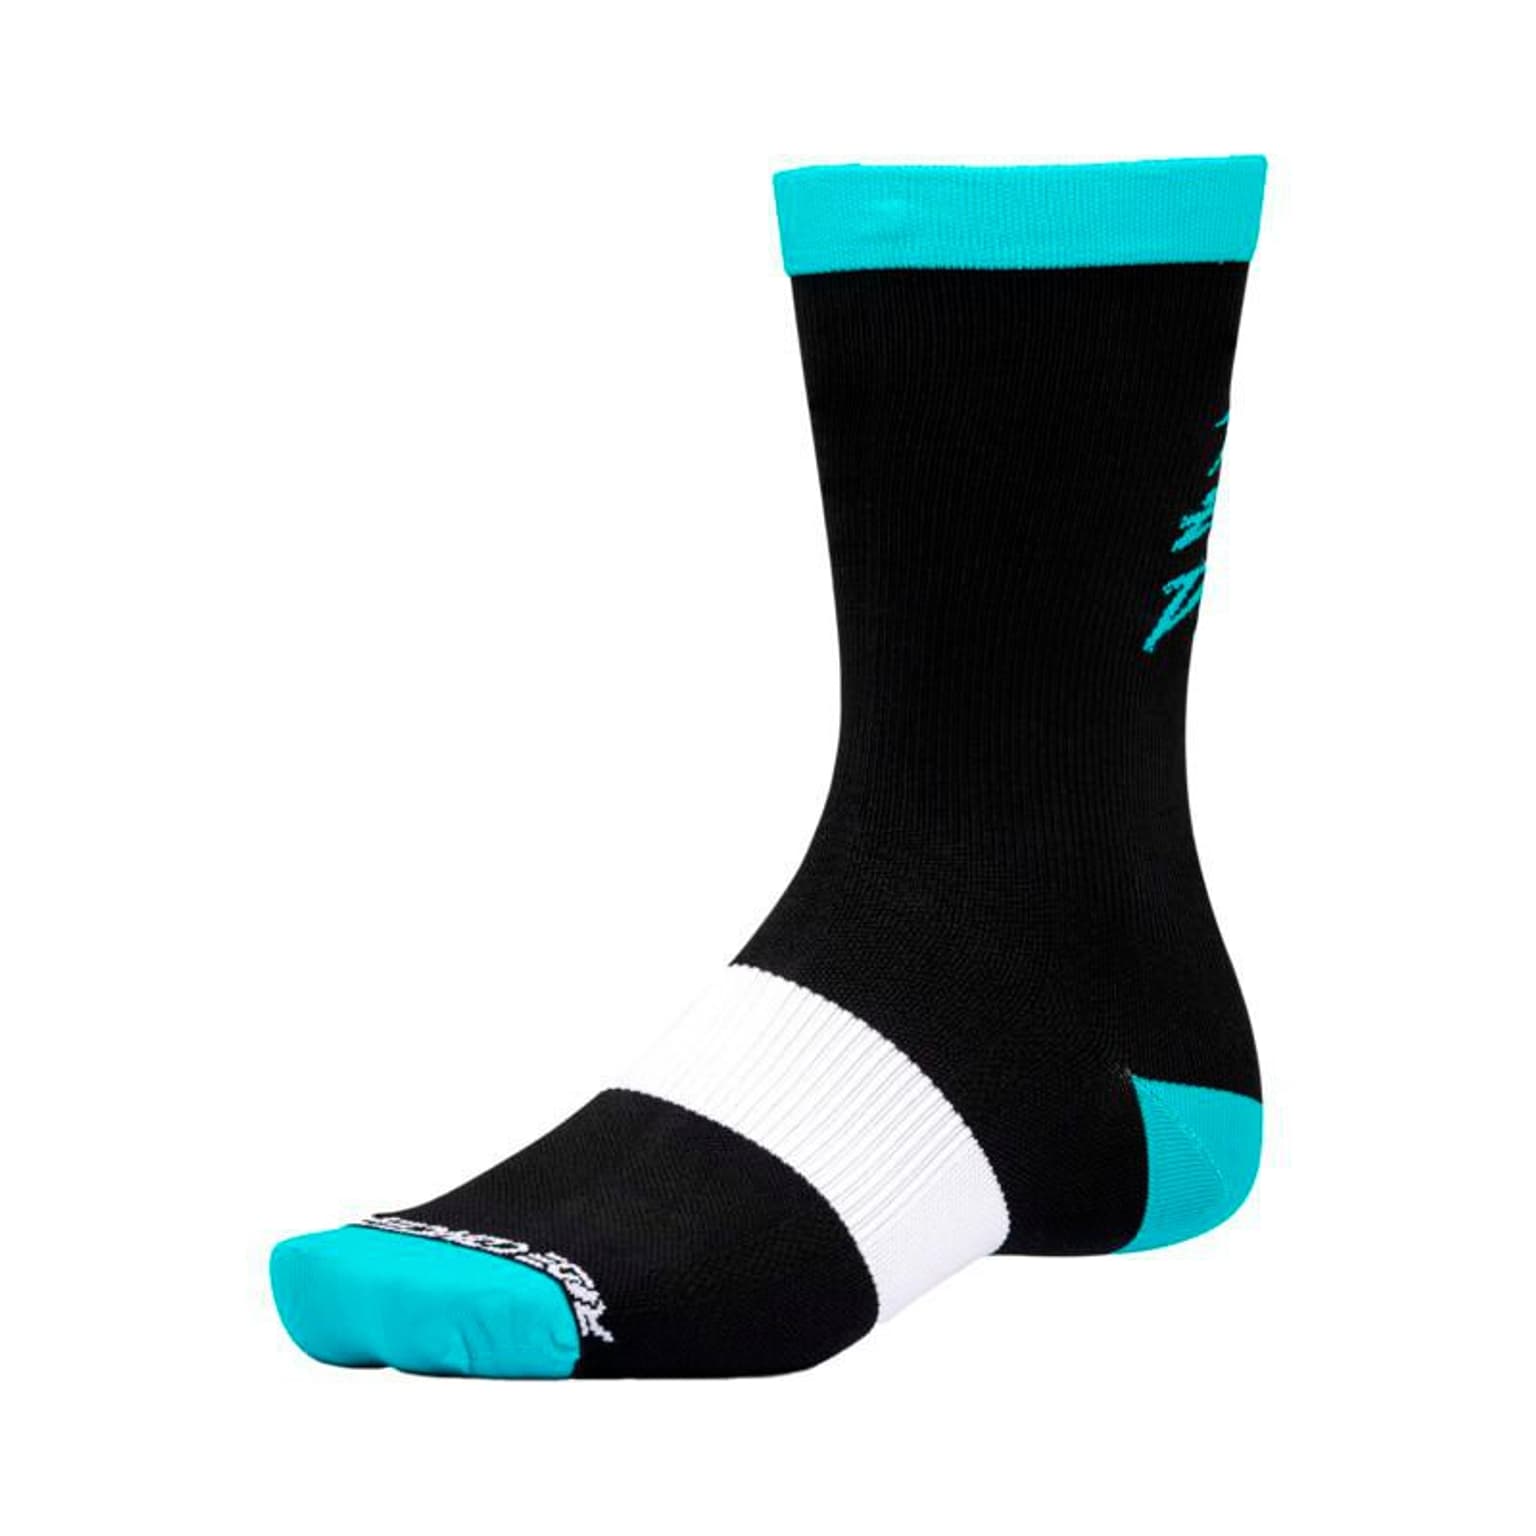 Ride Concepts Ride Concepts Ride Every Day Synthetic Velosocken tuerkis 2